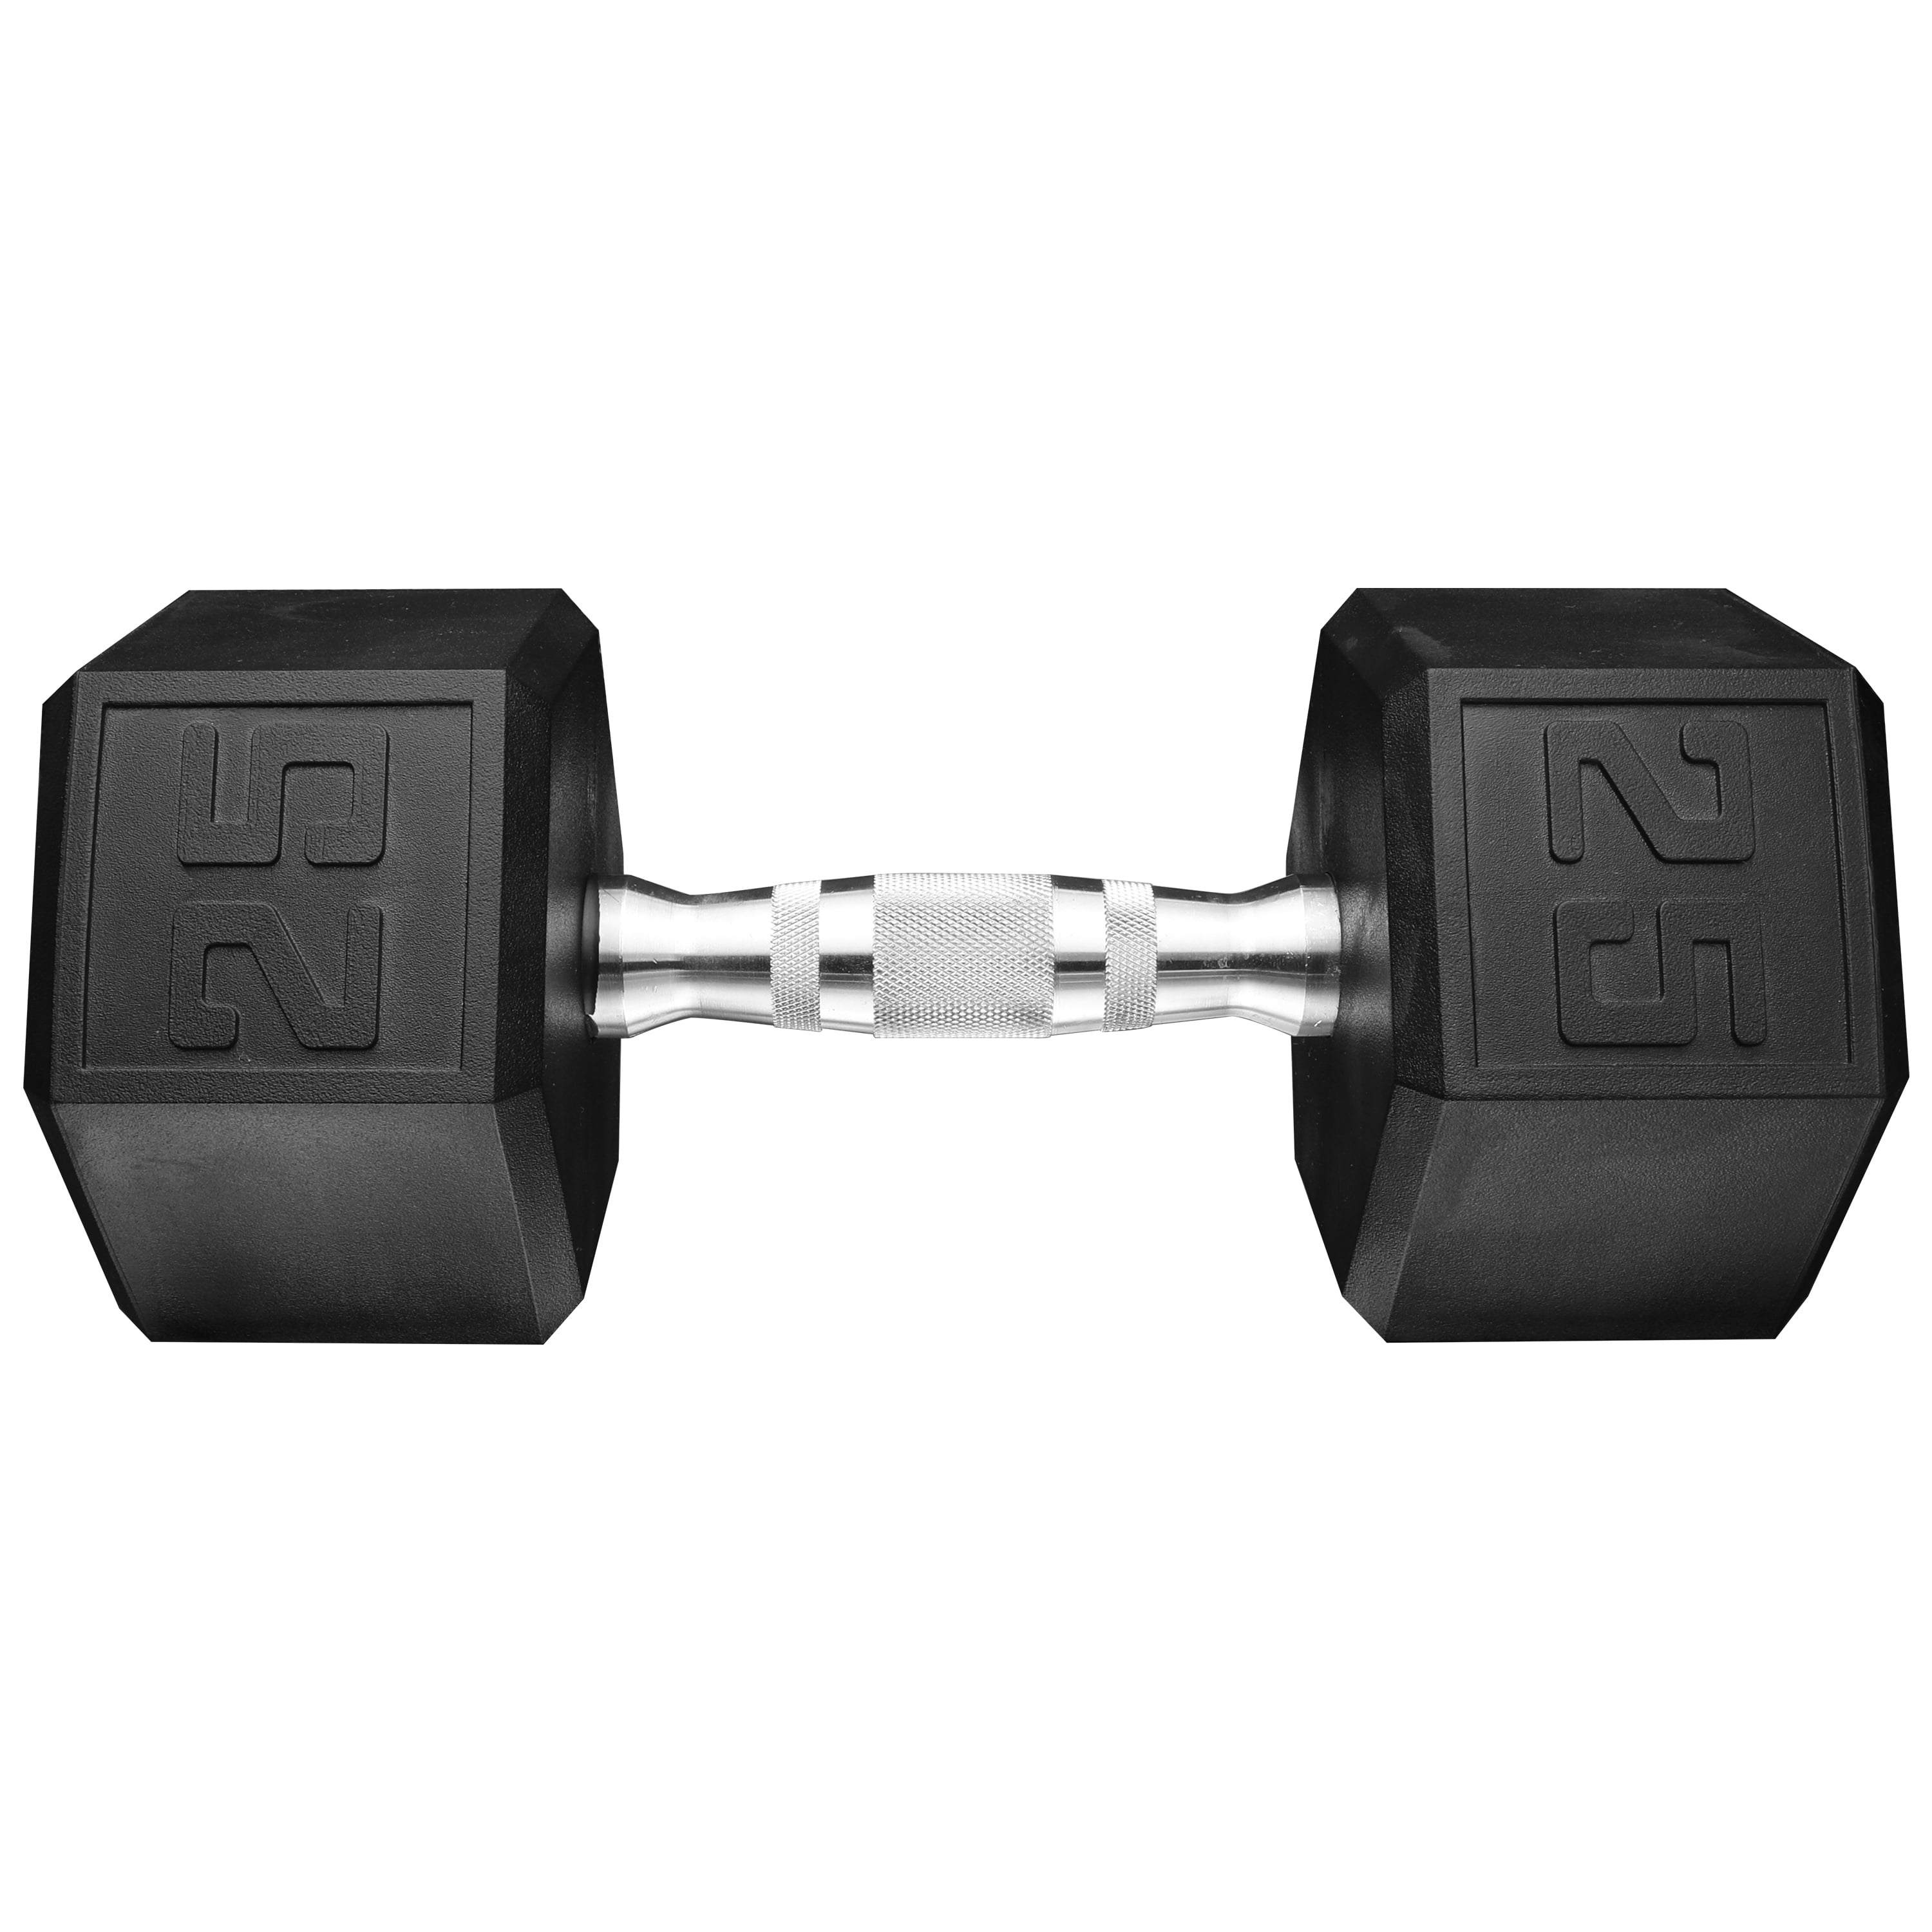 FAST FREE SHIP TOTAL 50LBS NEW 25lb Dumbbells Weider Rubber Coated Hex Pair 